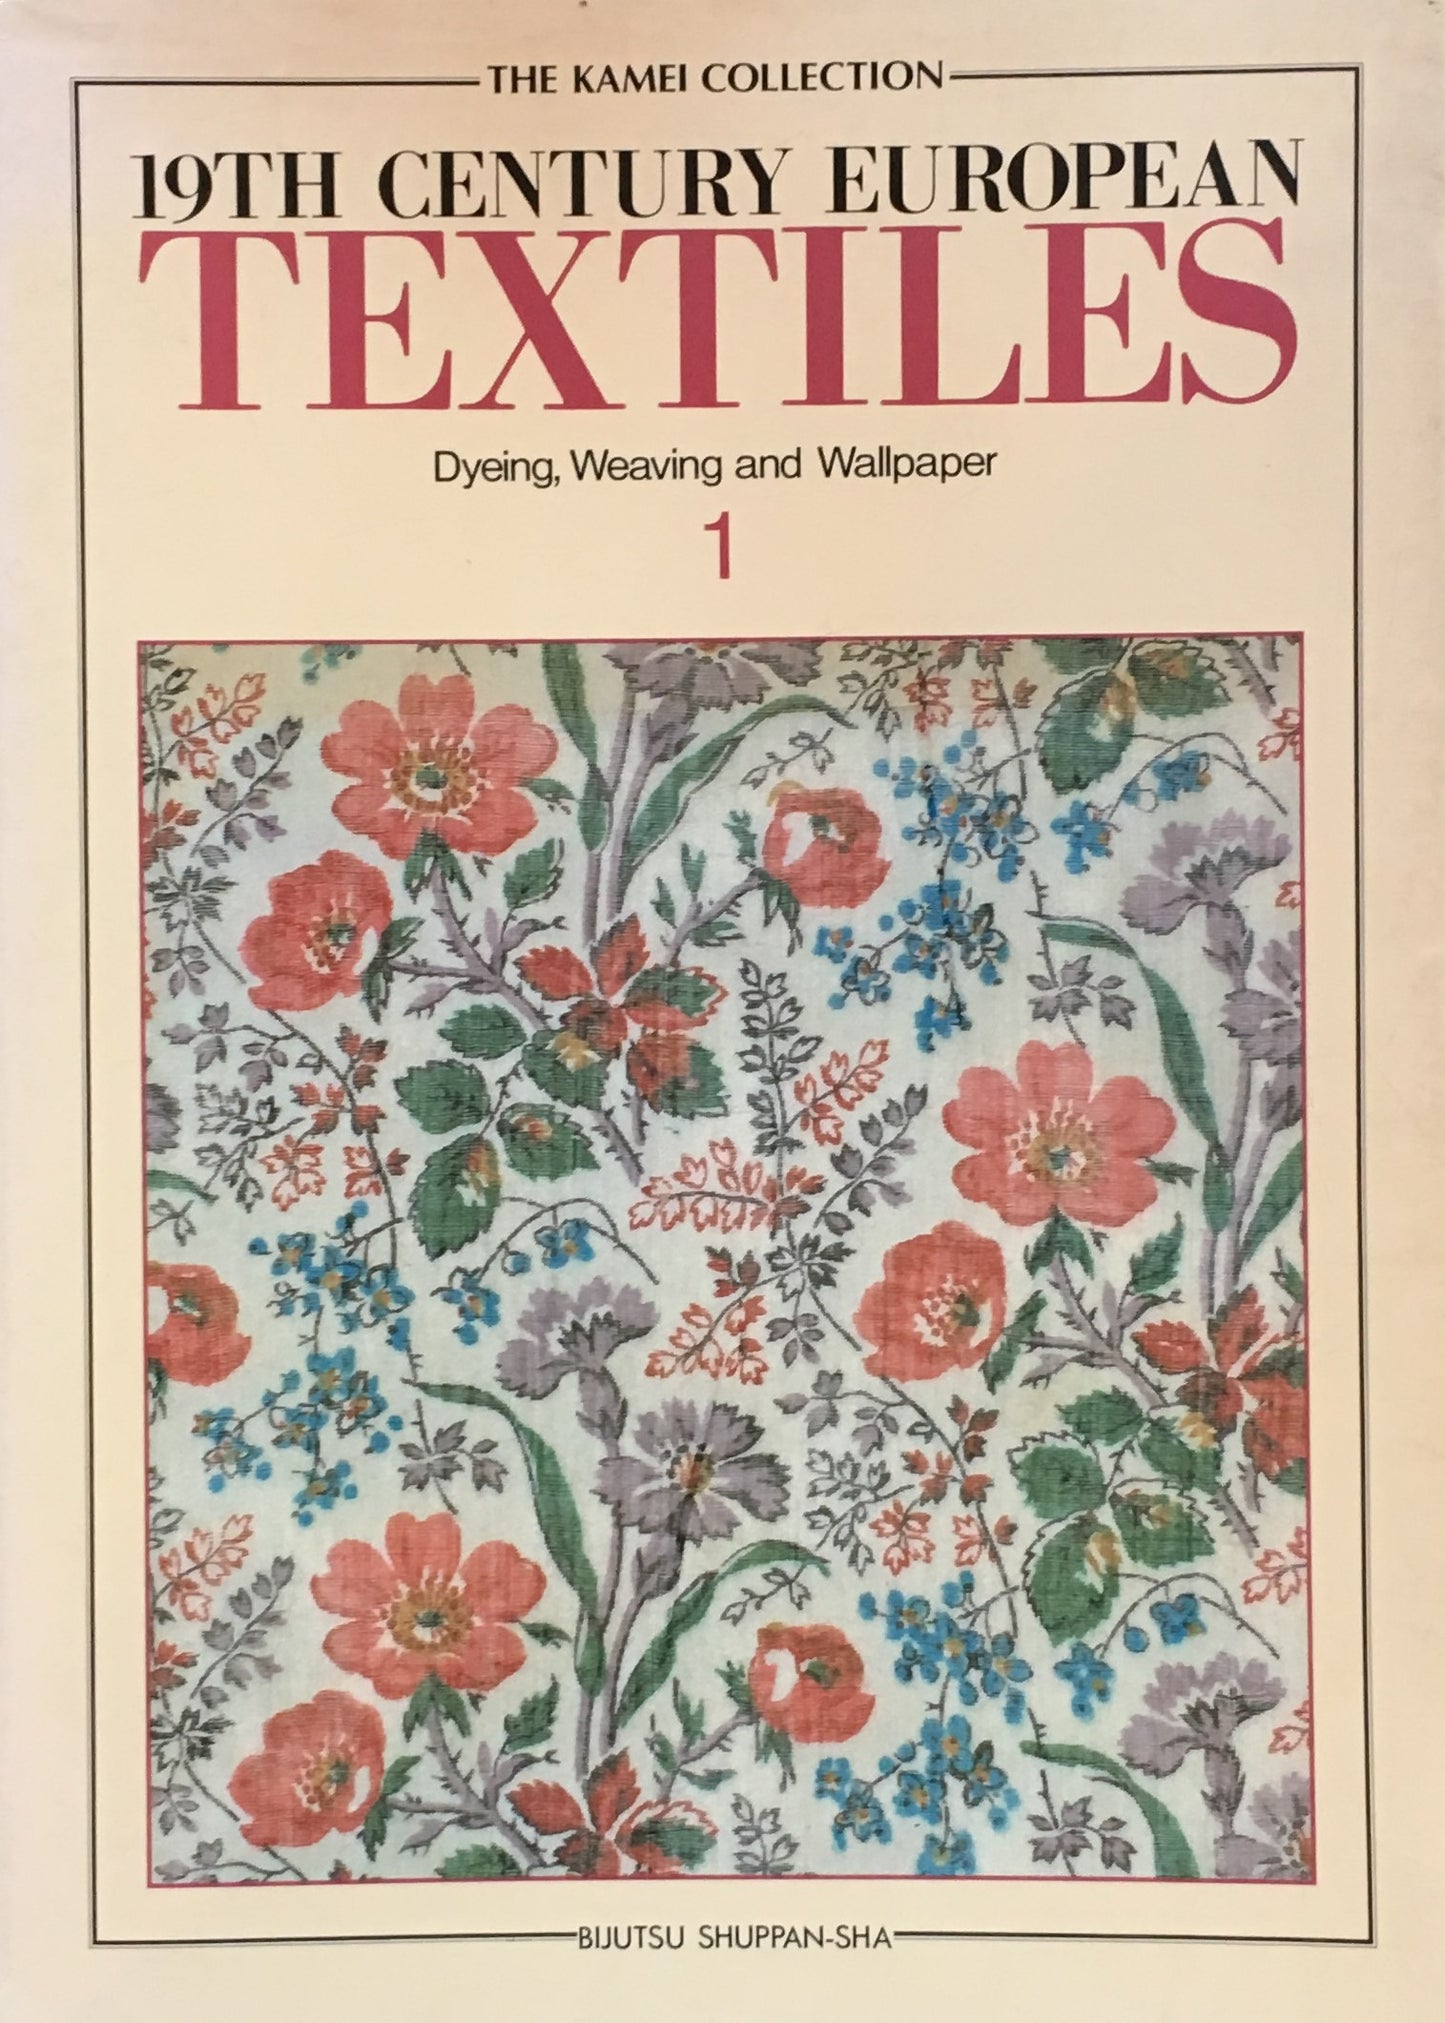 19th Century European TEXTILES　the KAMEI collection1 Dyeing,Weaving,and Wallpaper